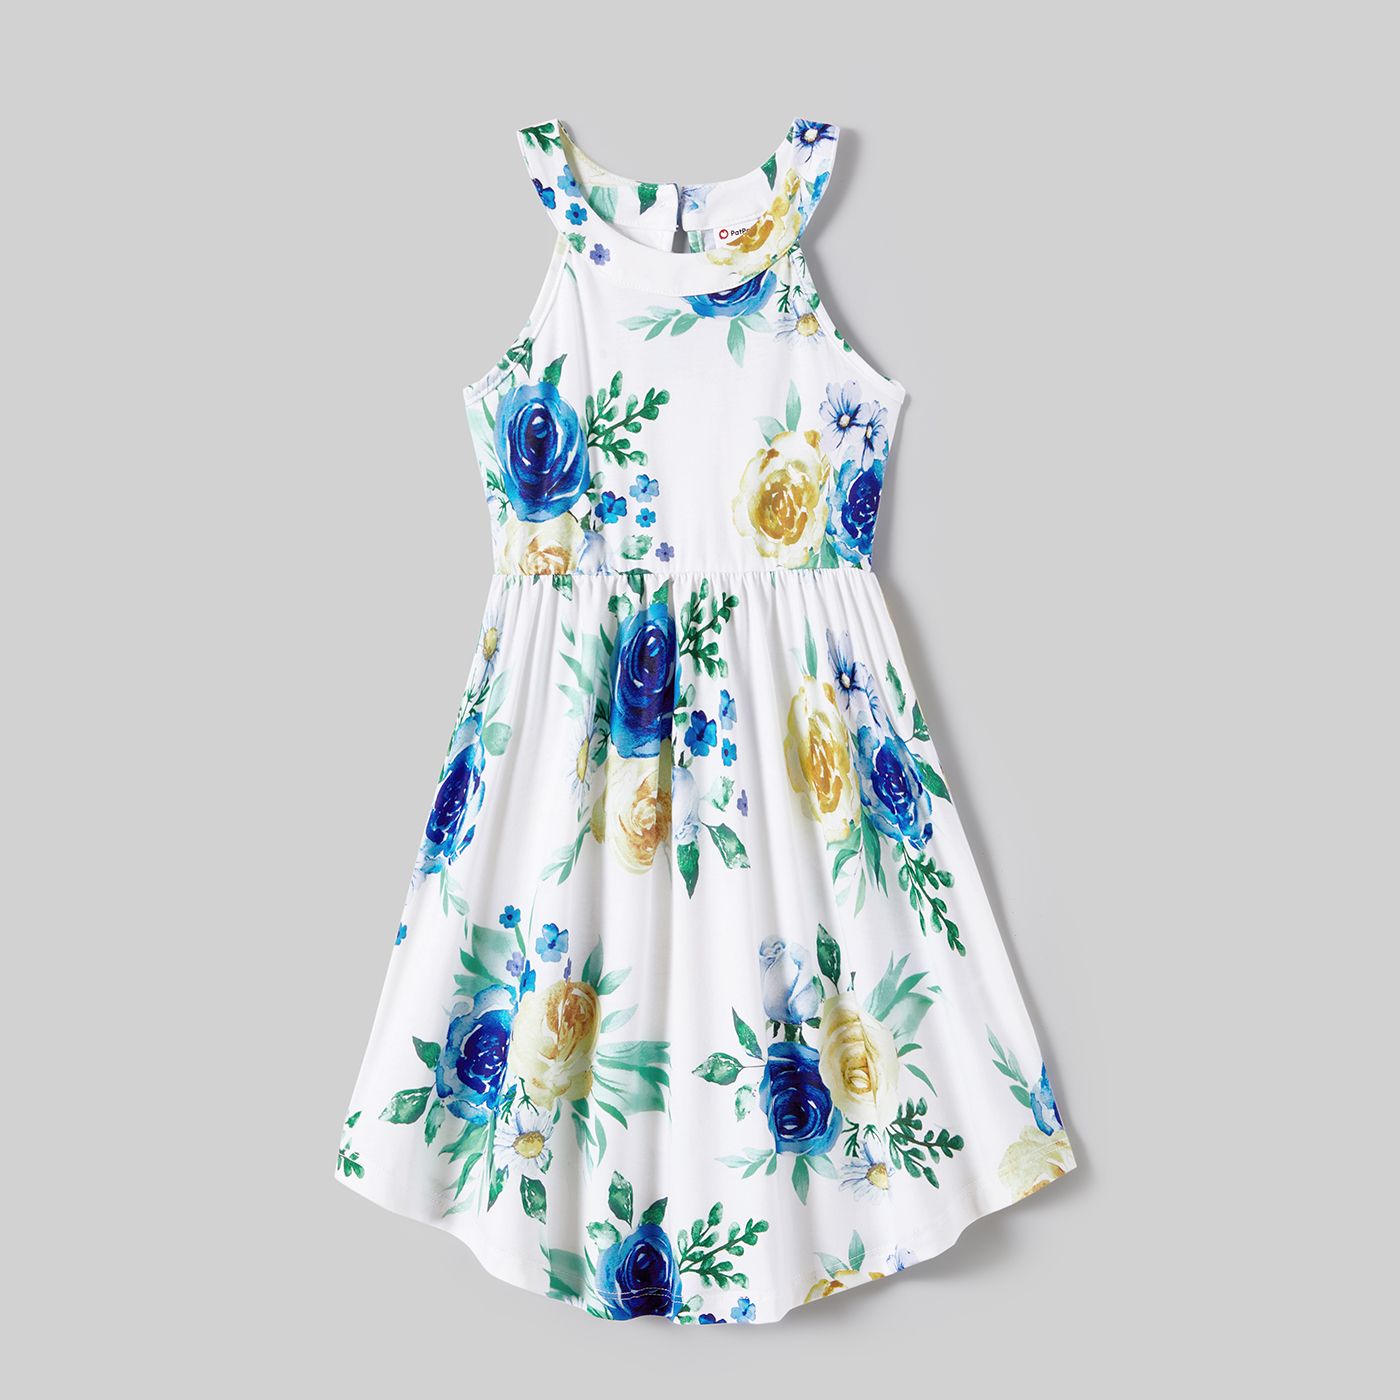 Family Matching Allover Floral Print Drawstring Waist Halter Neck Dresses And Color Block Short-sleeve T-shirts Sets